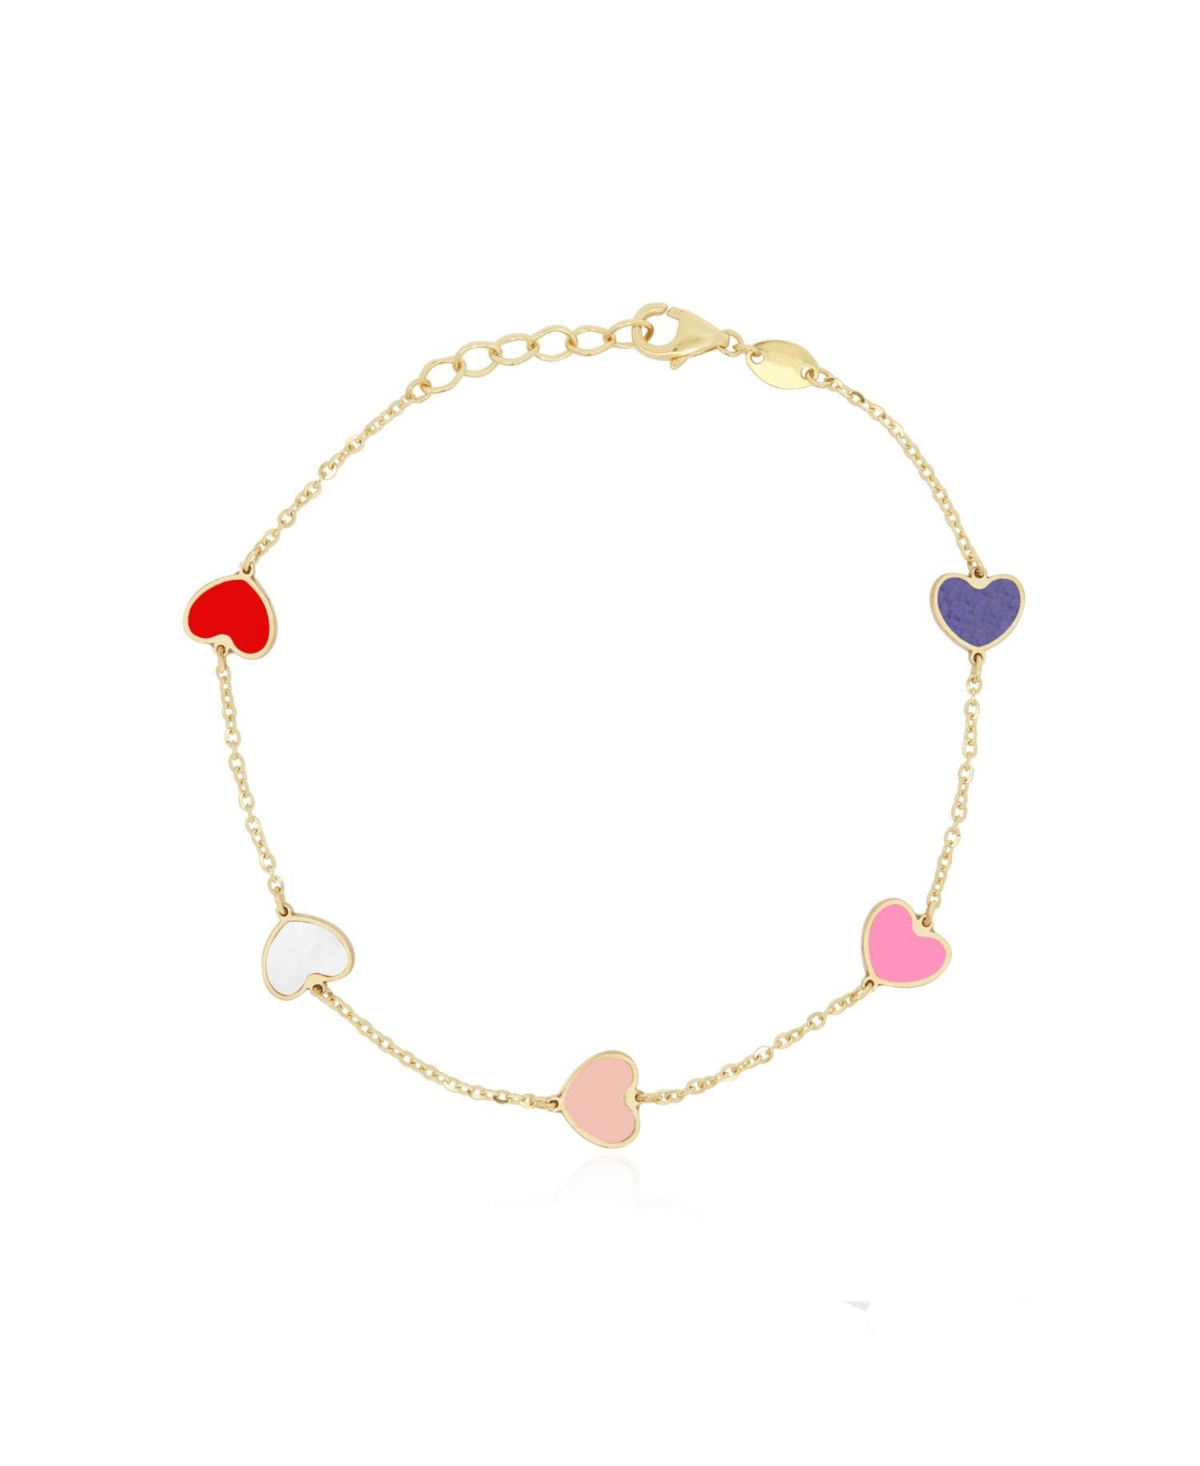 Multicolored Mixed Heart Station Bracelet - Open Miscellaneous